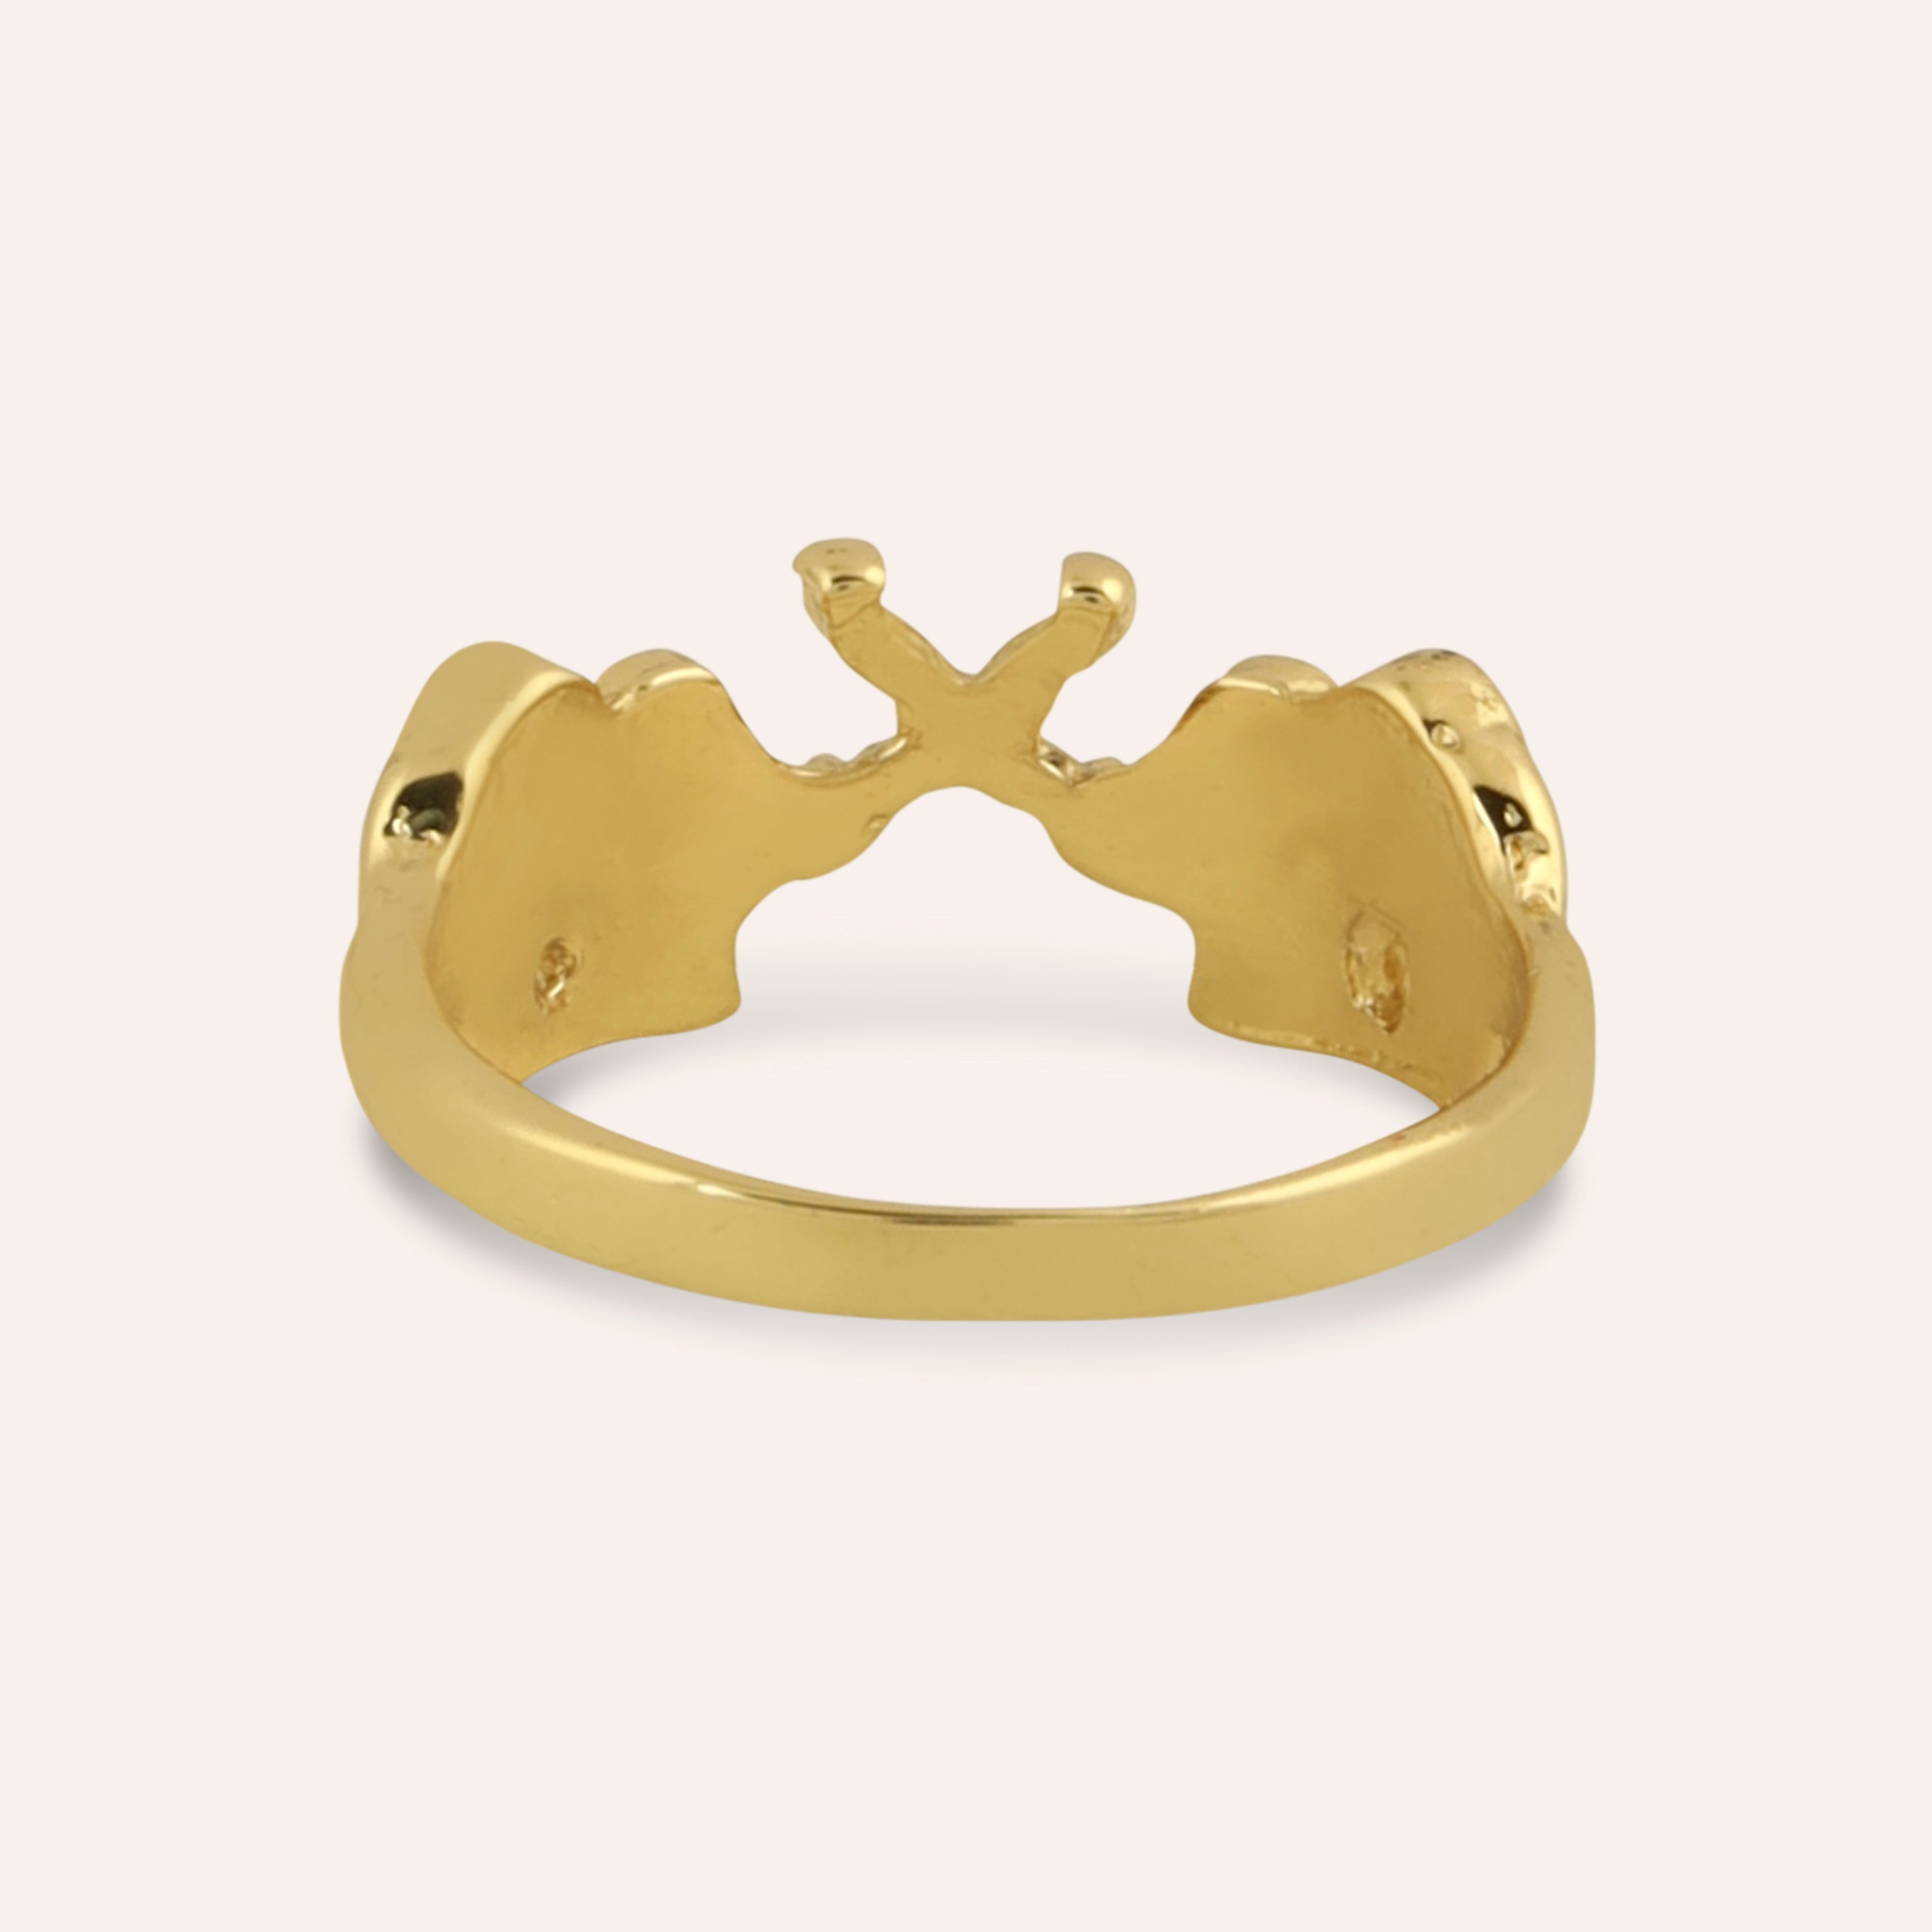 TFC Trunk Trove Gold Plated Ring-Elevate your style with our exquisite collection of gold-plated adjustable rings for women, including timeless signet rings. Explore cheapest fashion jewellery designs with anti-tarnish properties, all at The Fun Company with a touch of elegance